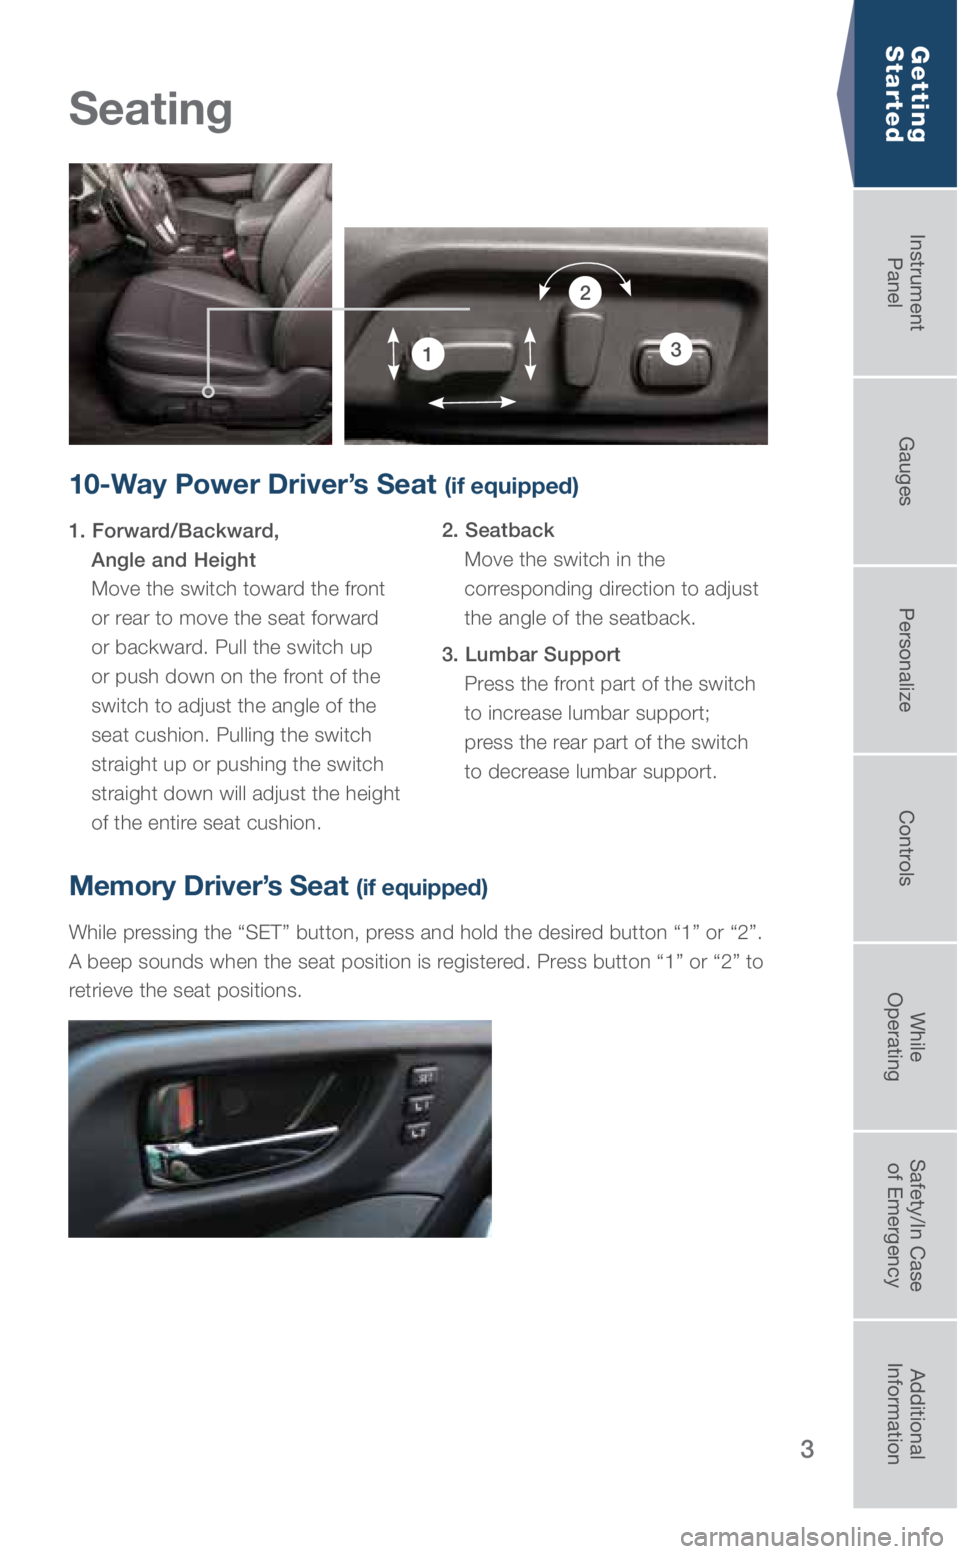 SUBARU OUTBACK 2018  Quick Guide 3
Seating
Getting  
Started
10-Way Power Driver’s Seat (if equipped)
1. Forward/Backward,   
Angle and Height  
 
Move the switch toward the front 
or rear to move the seat forward 
or backward. Pul